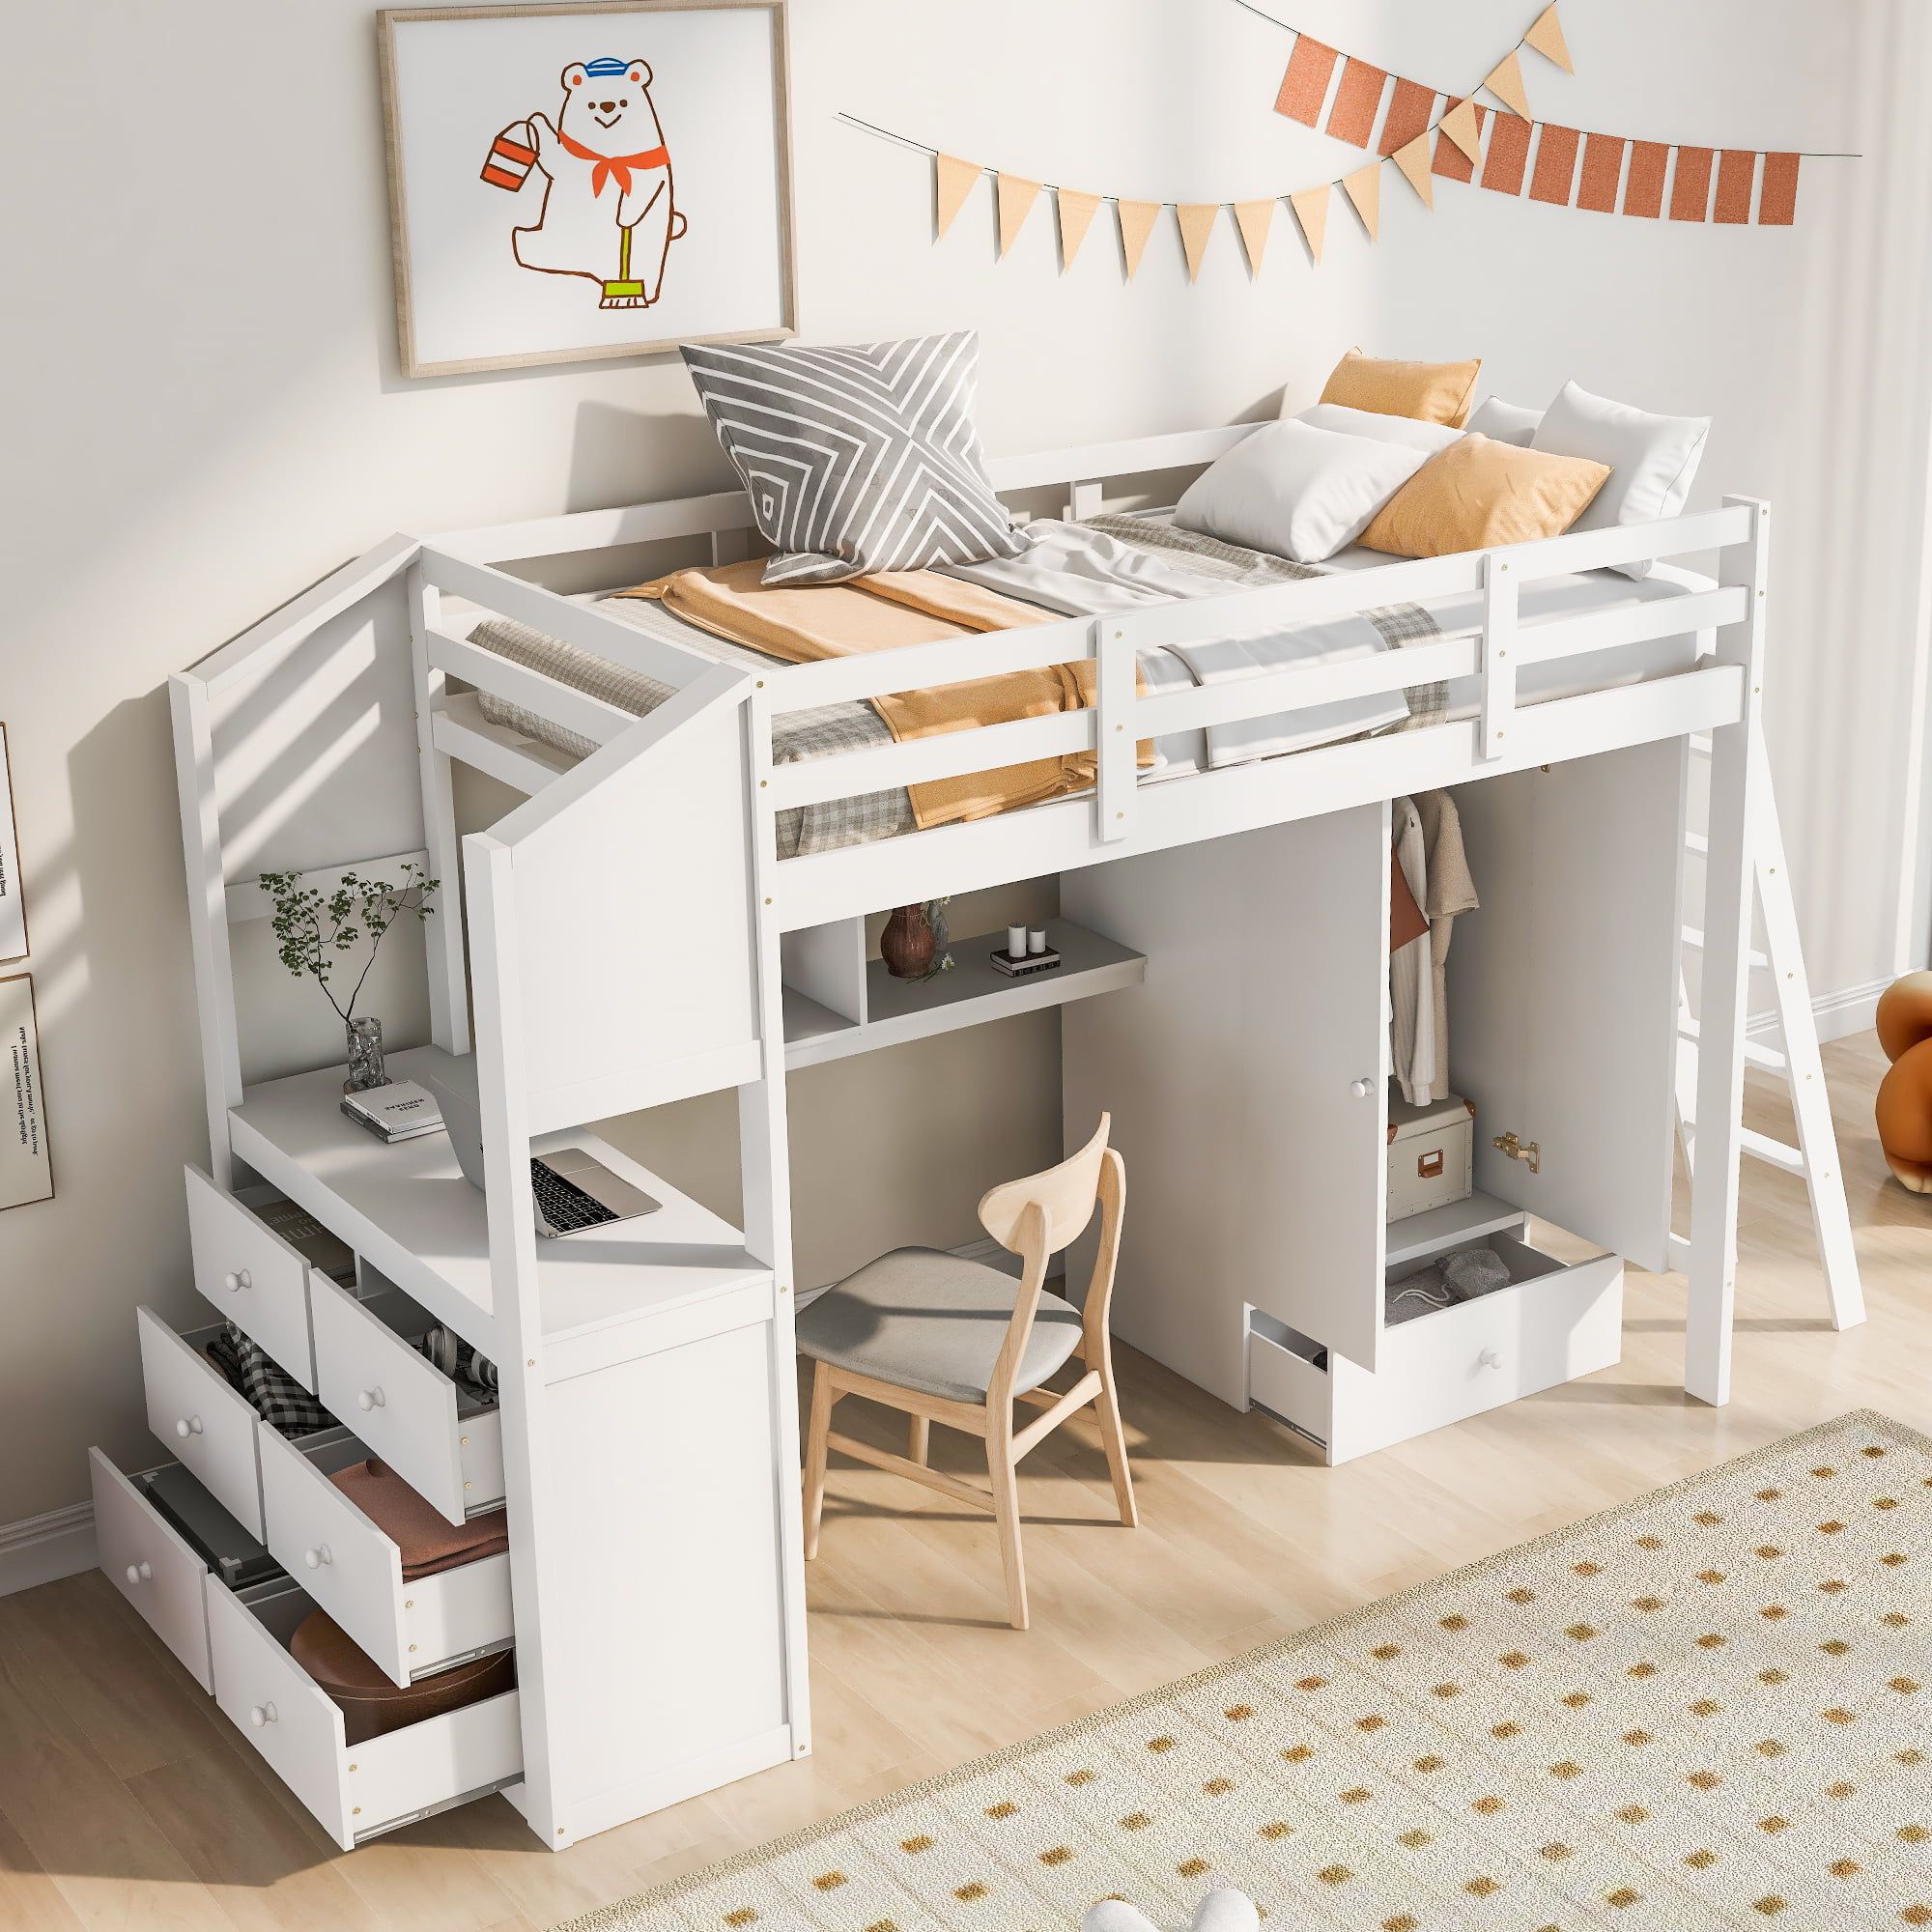 Twin Size Loft Bed With Wardrobe And Drawers, Attached Desk With Shelves –  Cool Toddler Beds Intended For High Sleeper Bed With Wardrobes (Gallery 18 of 20)